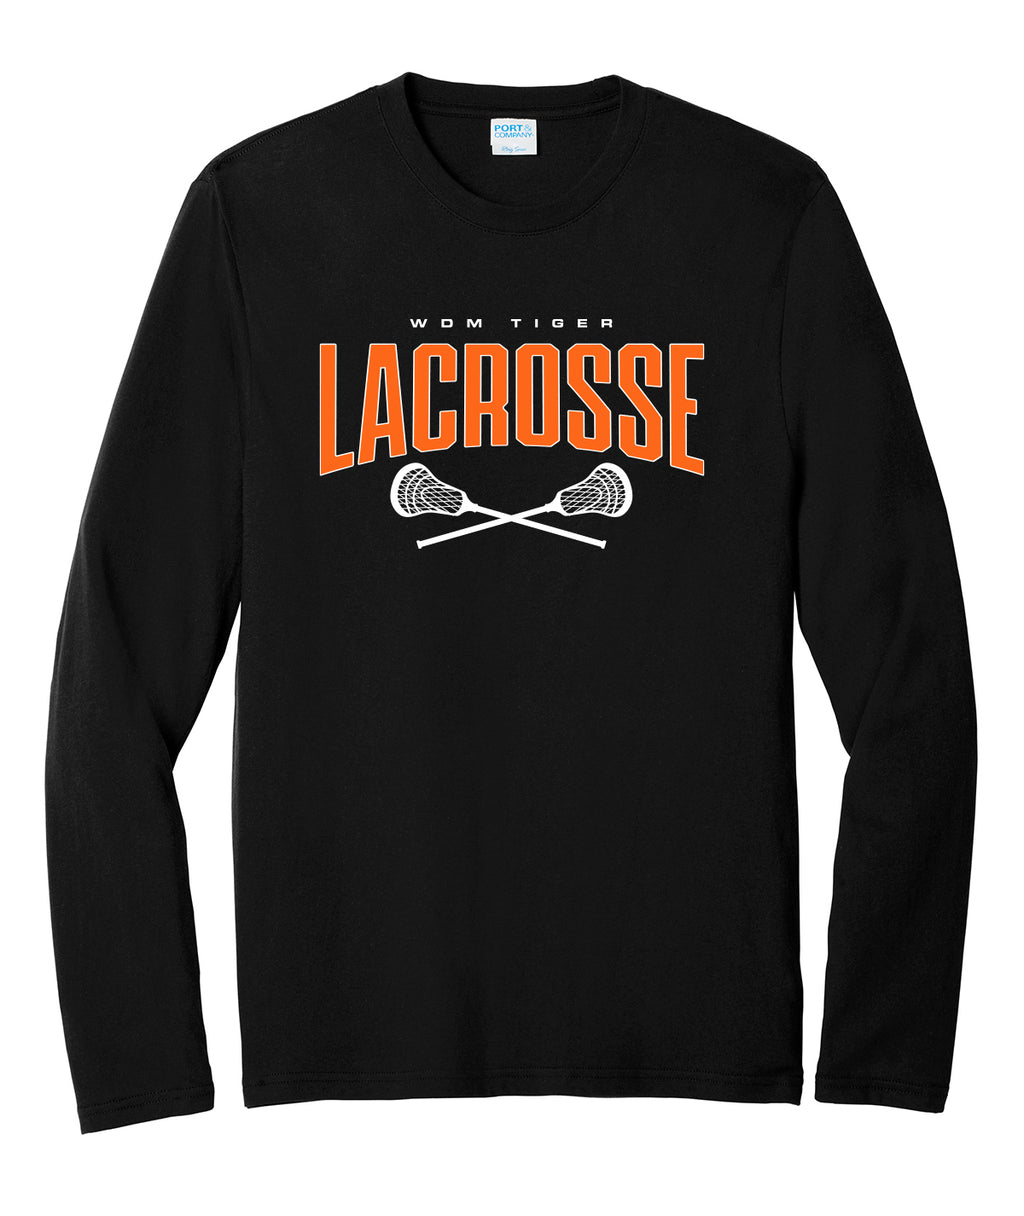 WDM Tiger Lacrosse Long-Sleeve Softstyle Tee